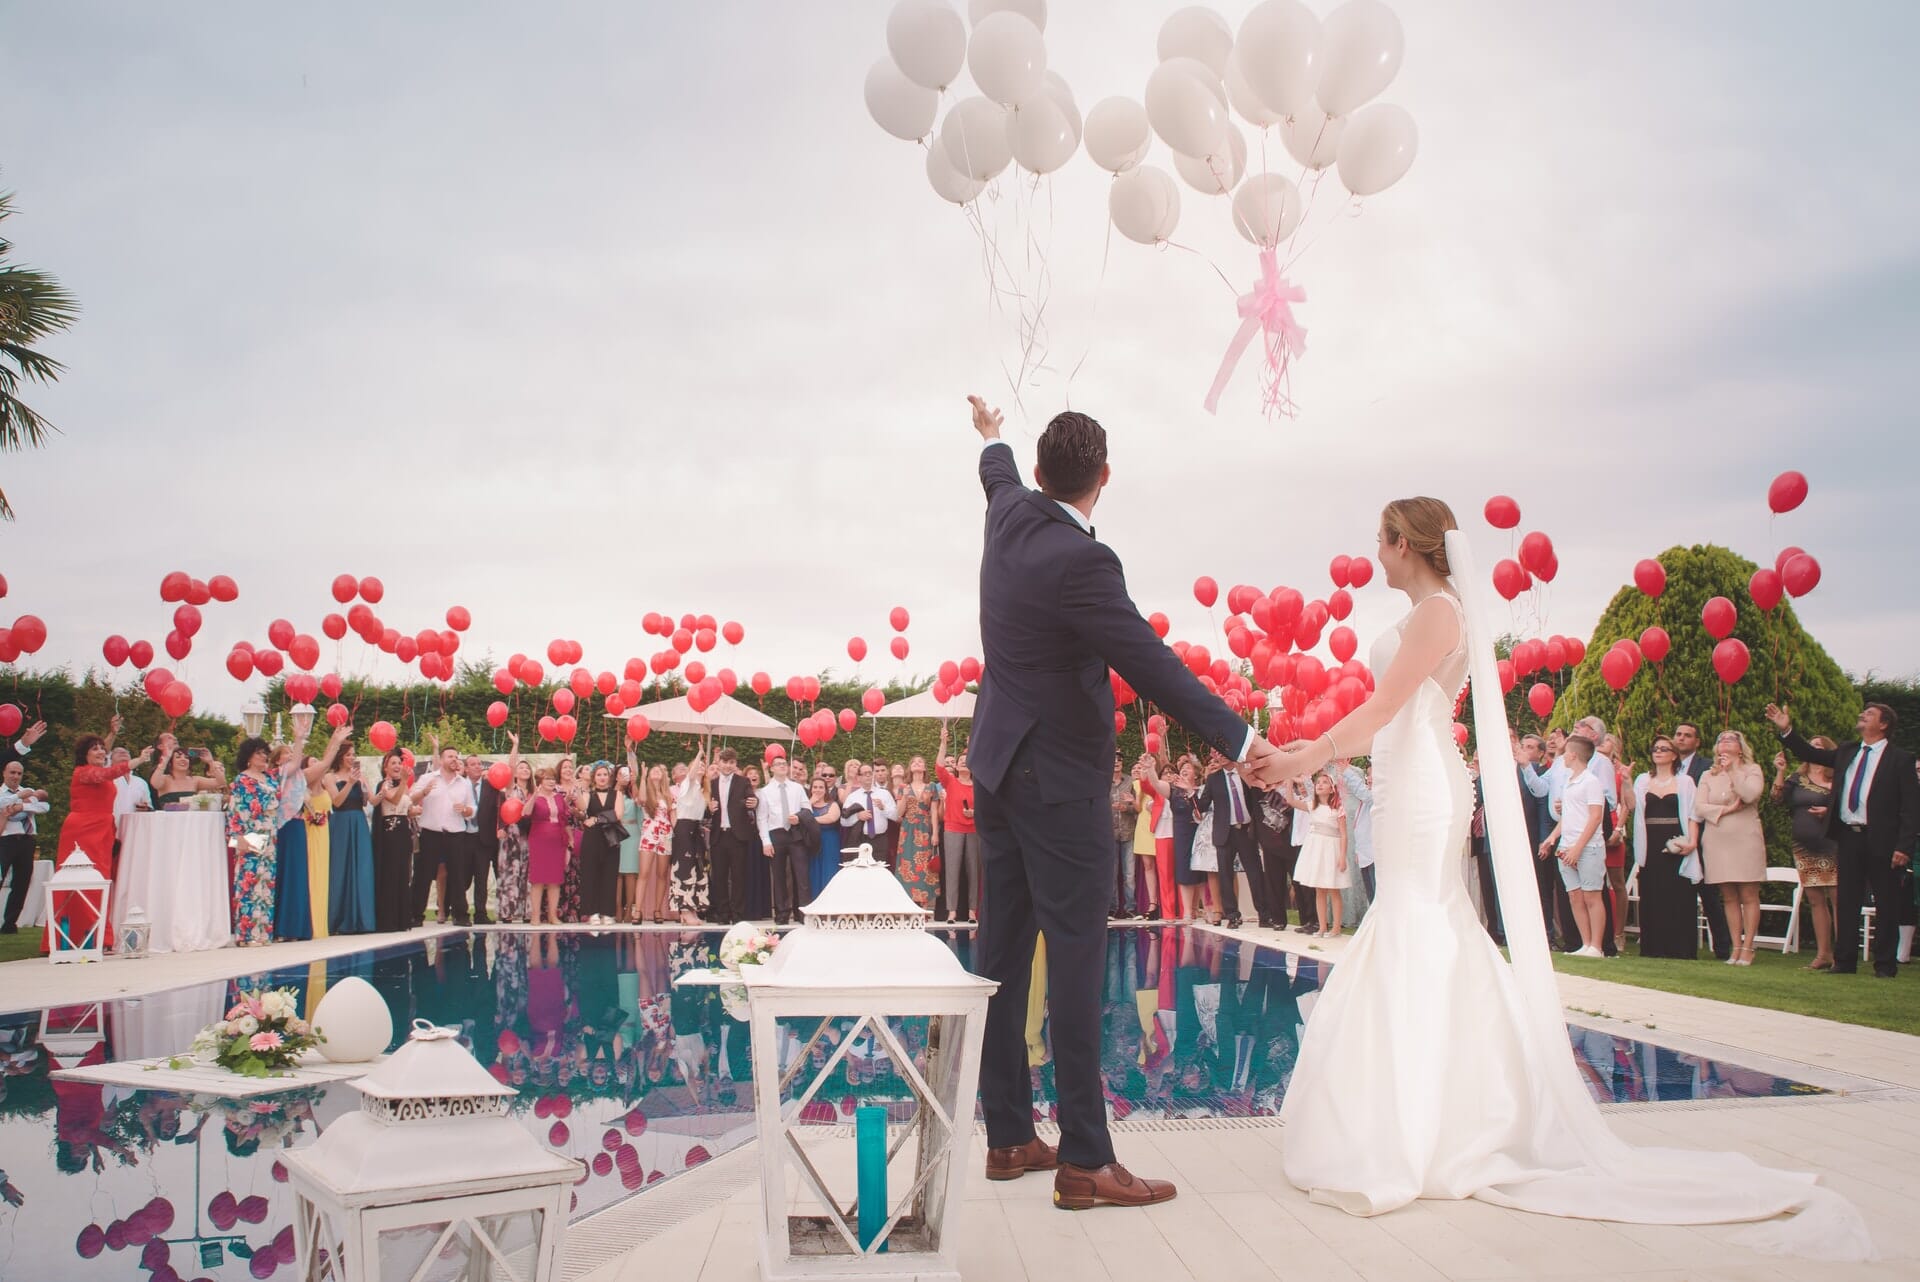 Bride and groom releasing a bunch of balloons outdoors.